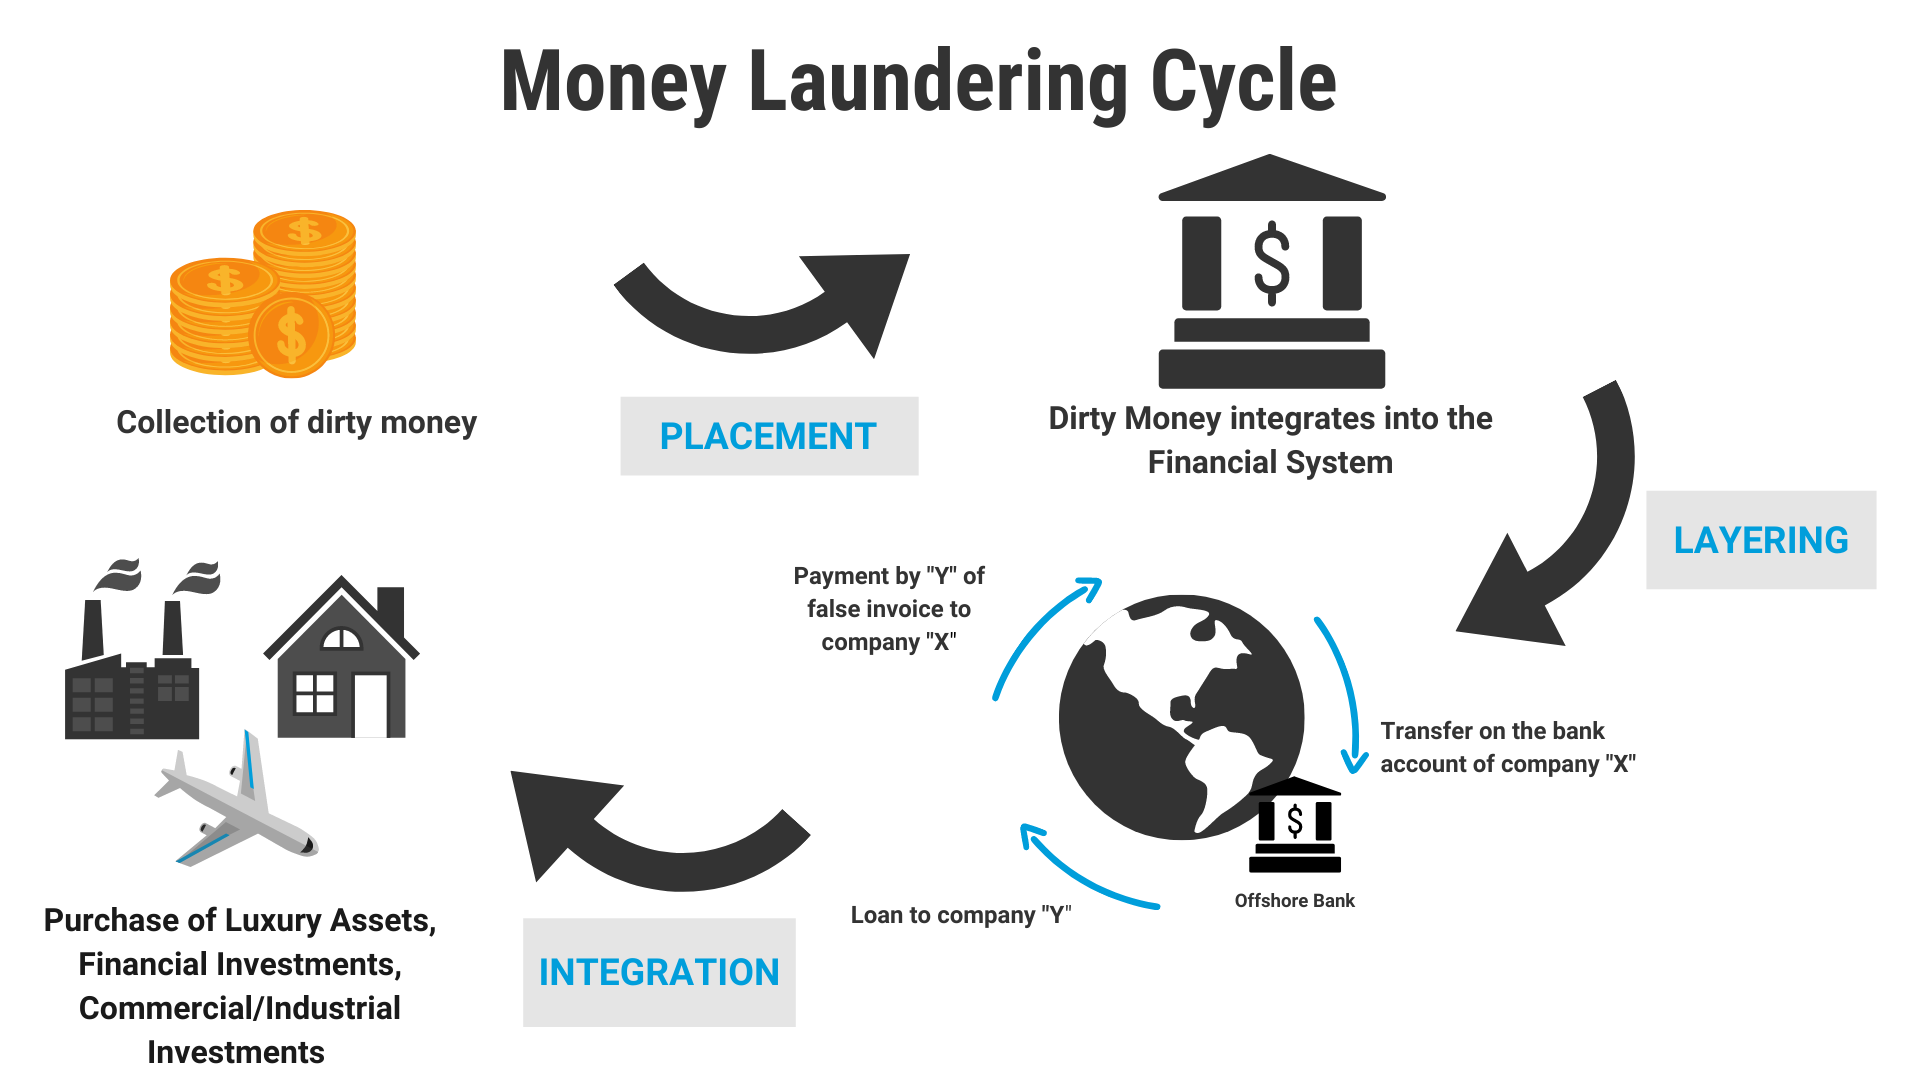 Laundering money examples of What are